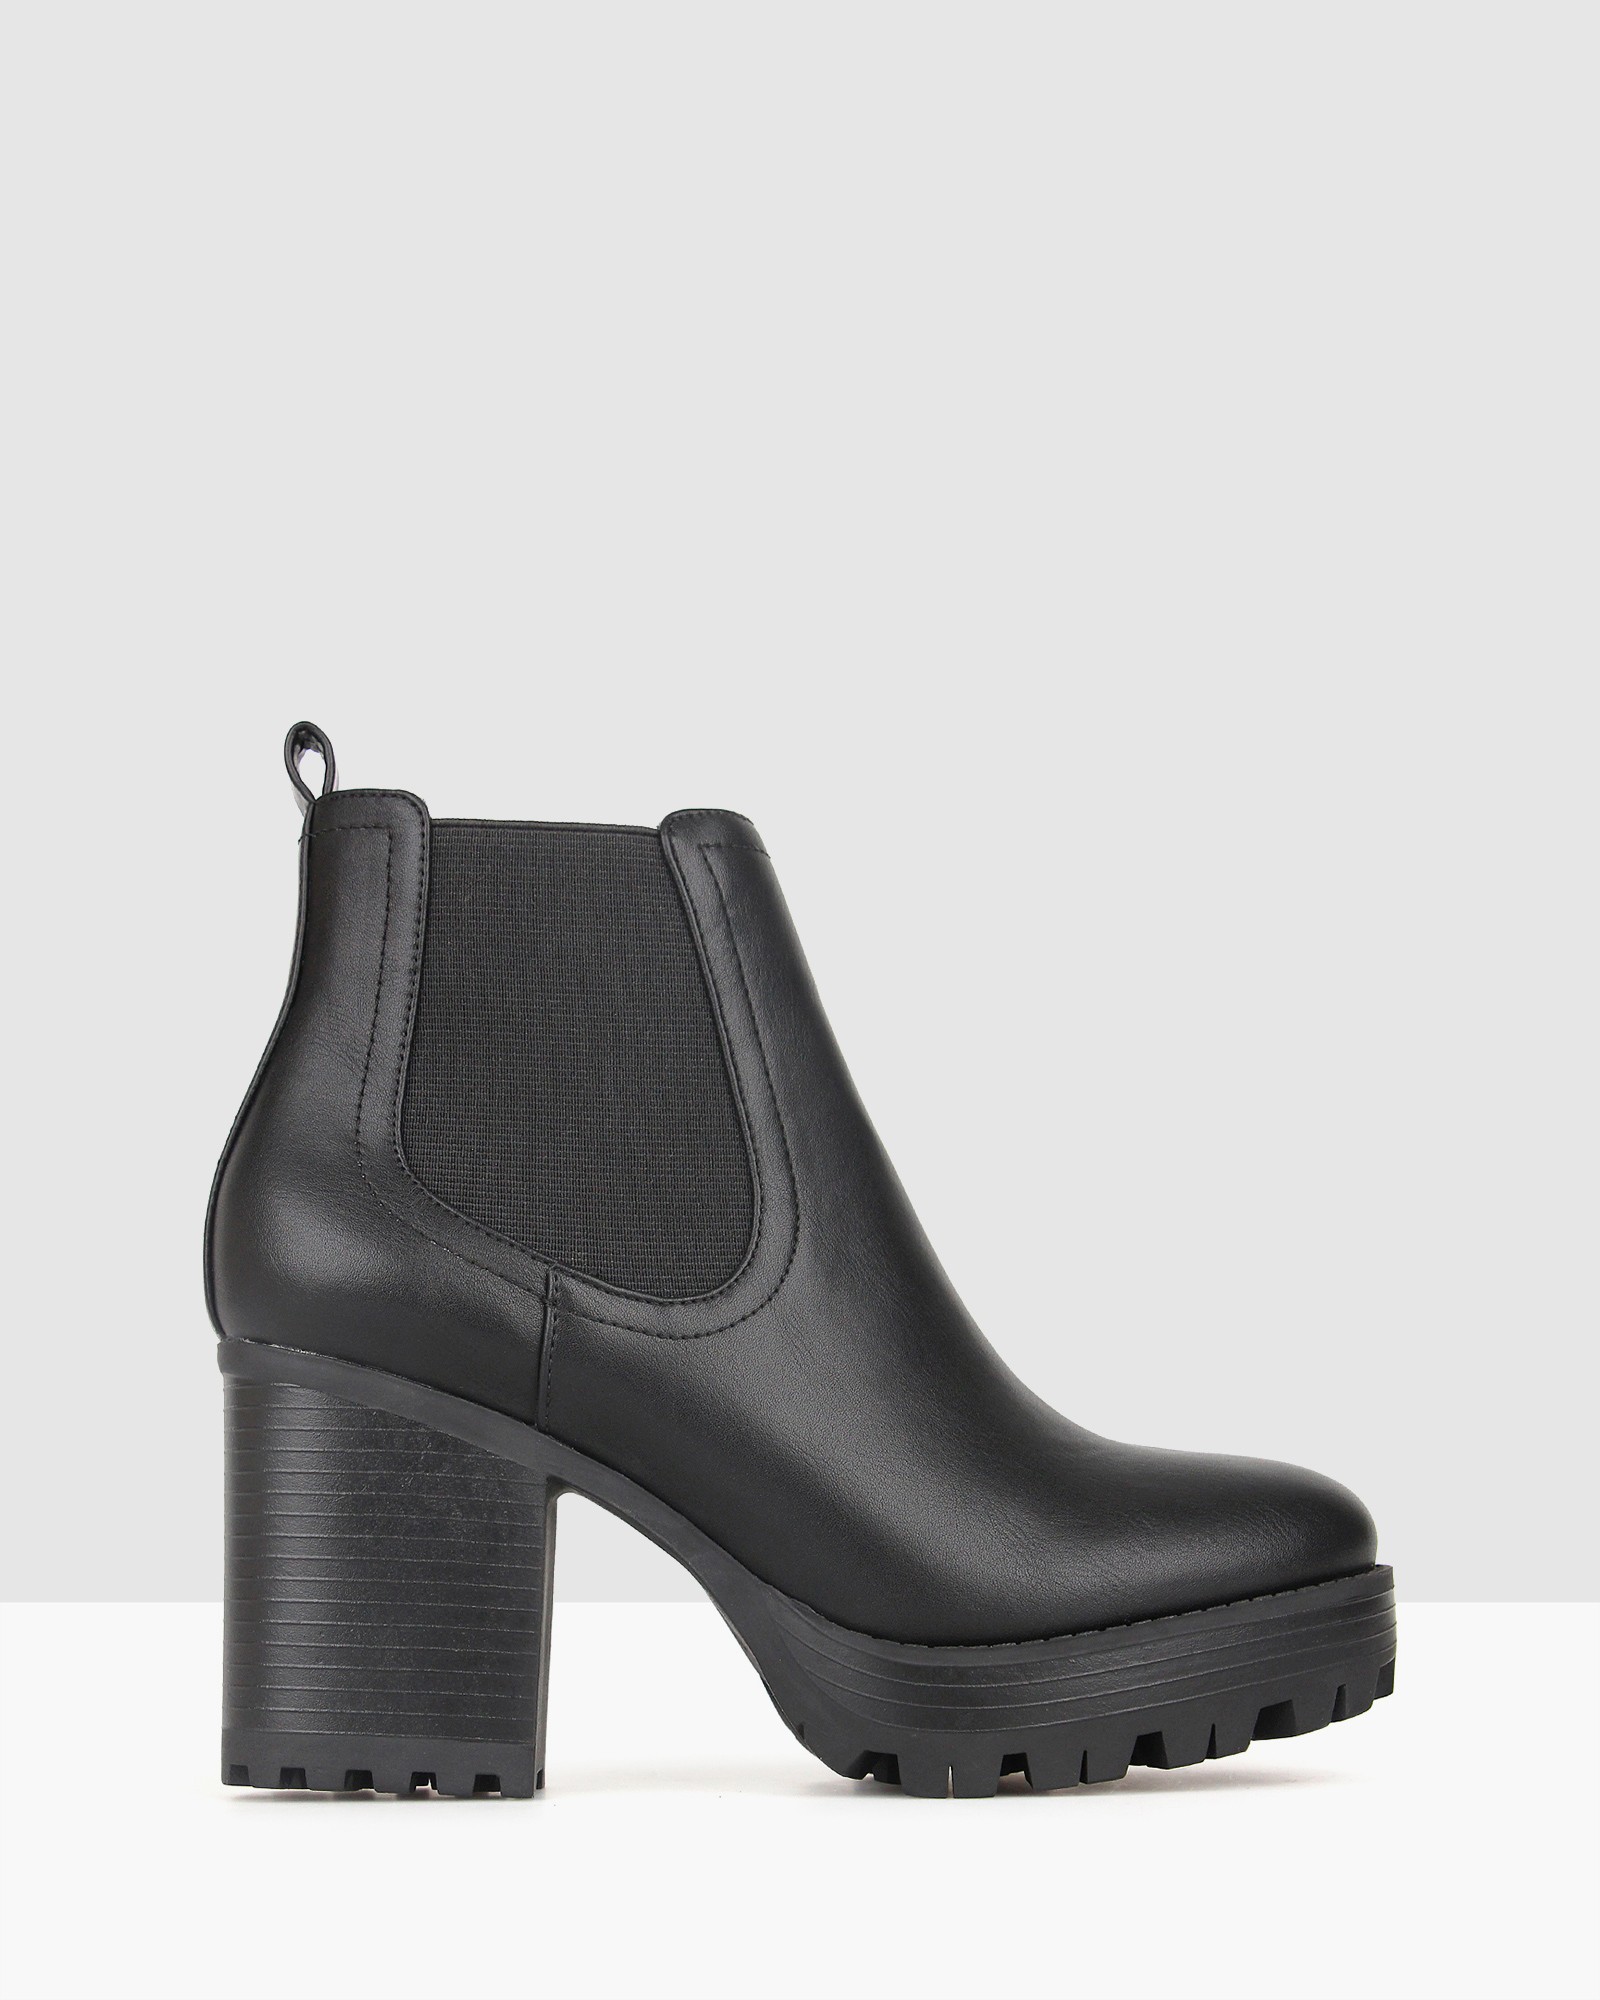 Edge Chunky Ankle Boots Black by Betts | ShoeSales